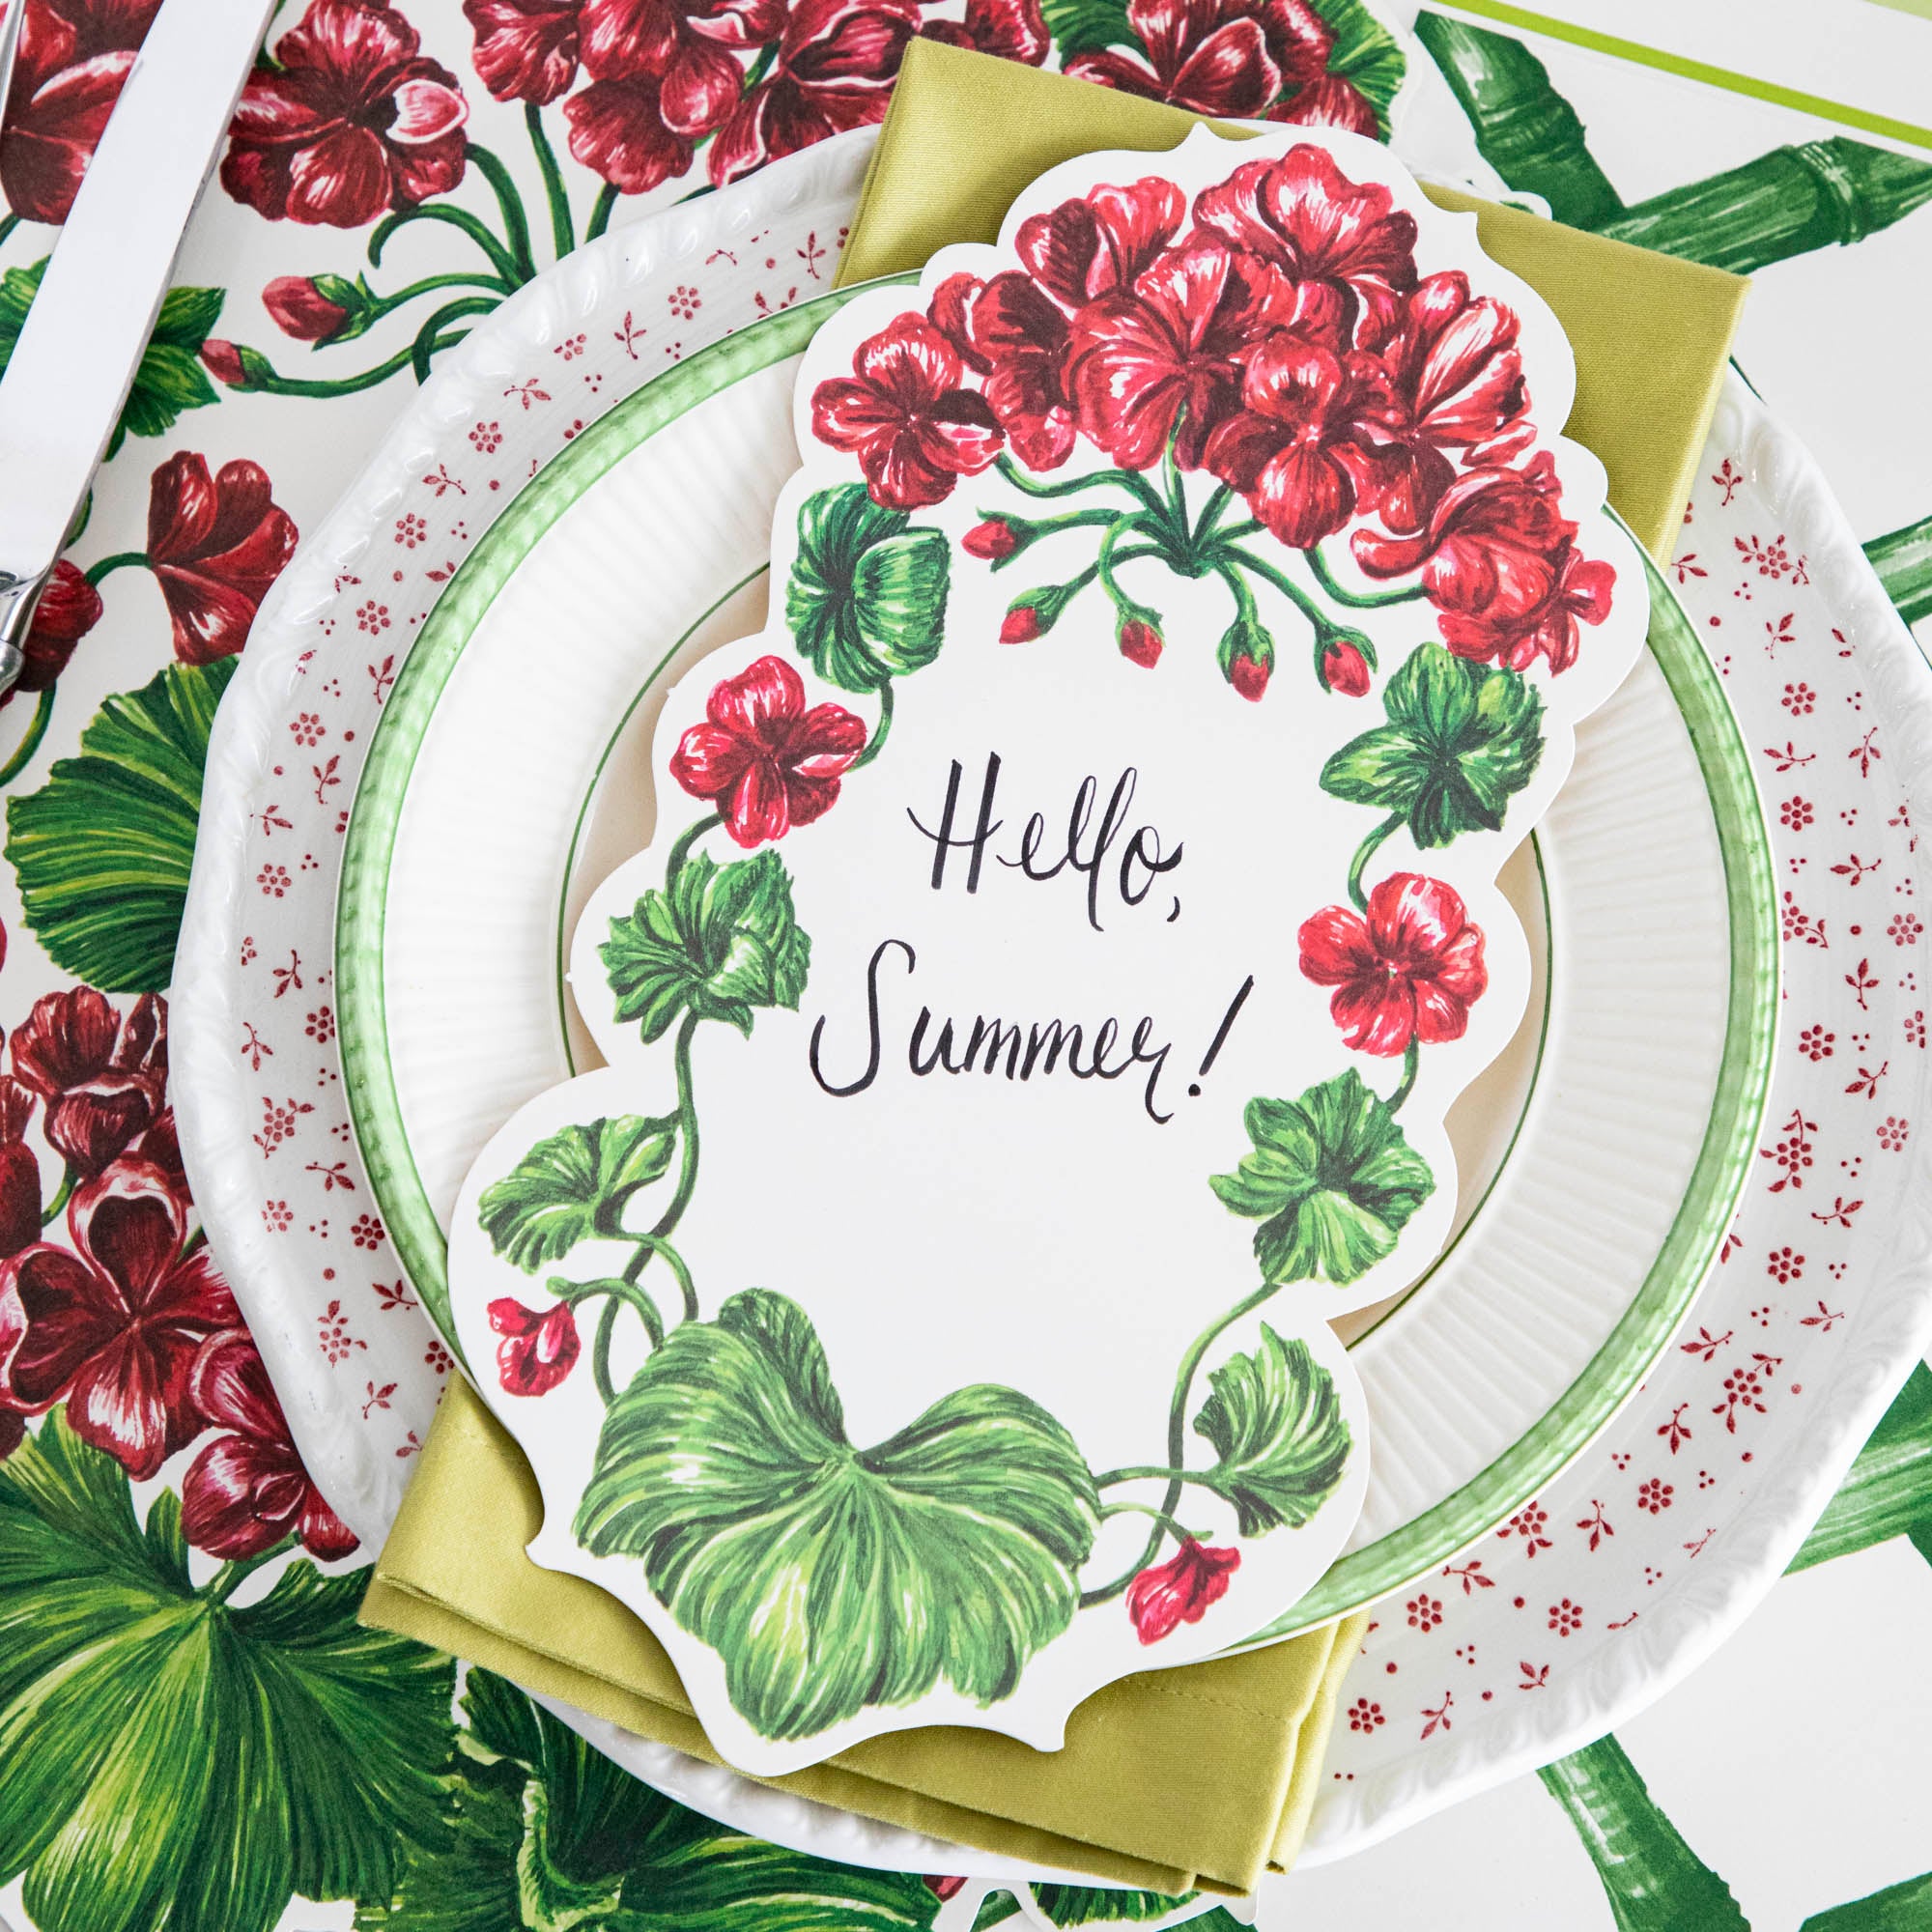 A Geranium Table Accent with &quot;Hello Summer!&quot; written on it resting on the plate of an elegant place setting.